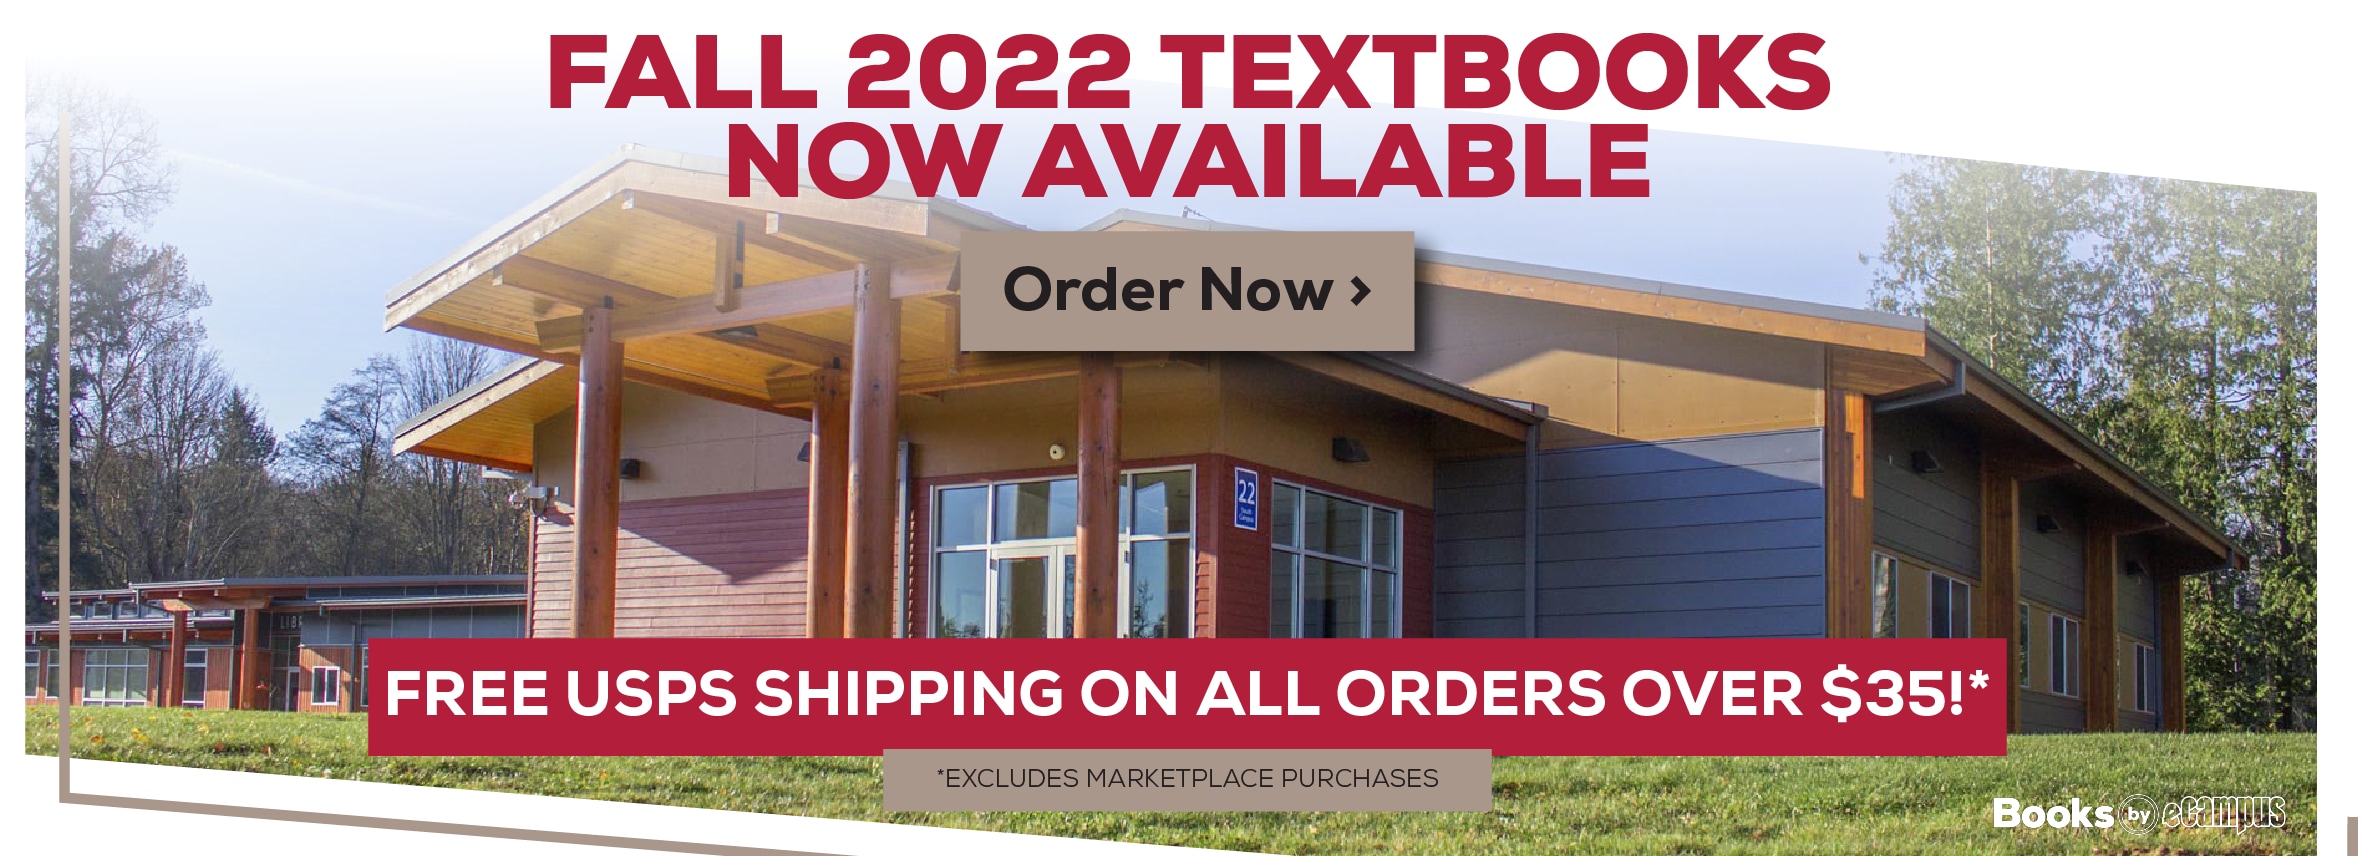 Fall 2022 Textbooks Now Available. Order now. Free shipping on all orders overf $35